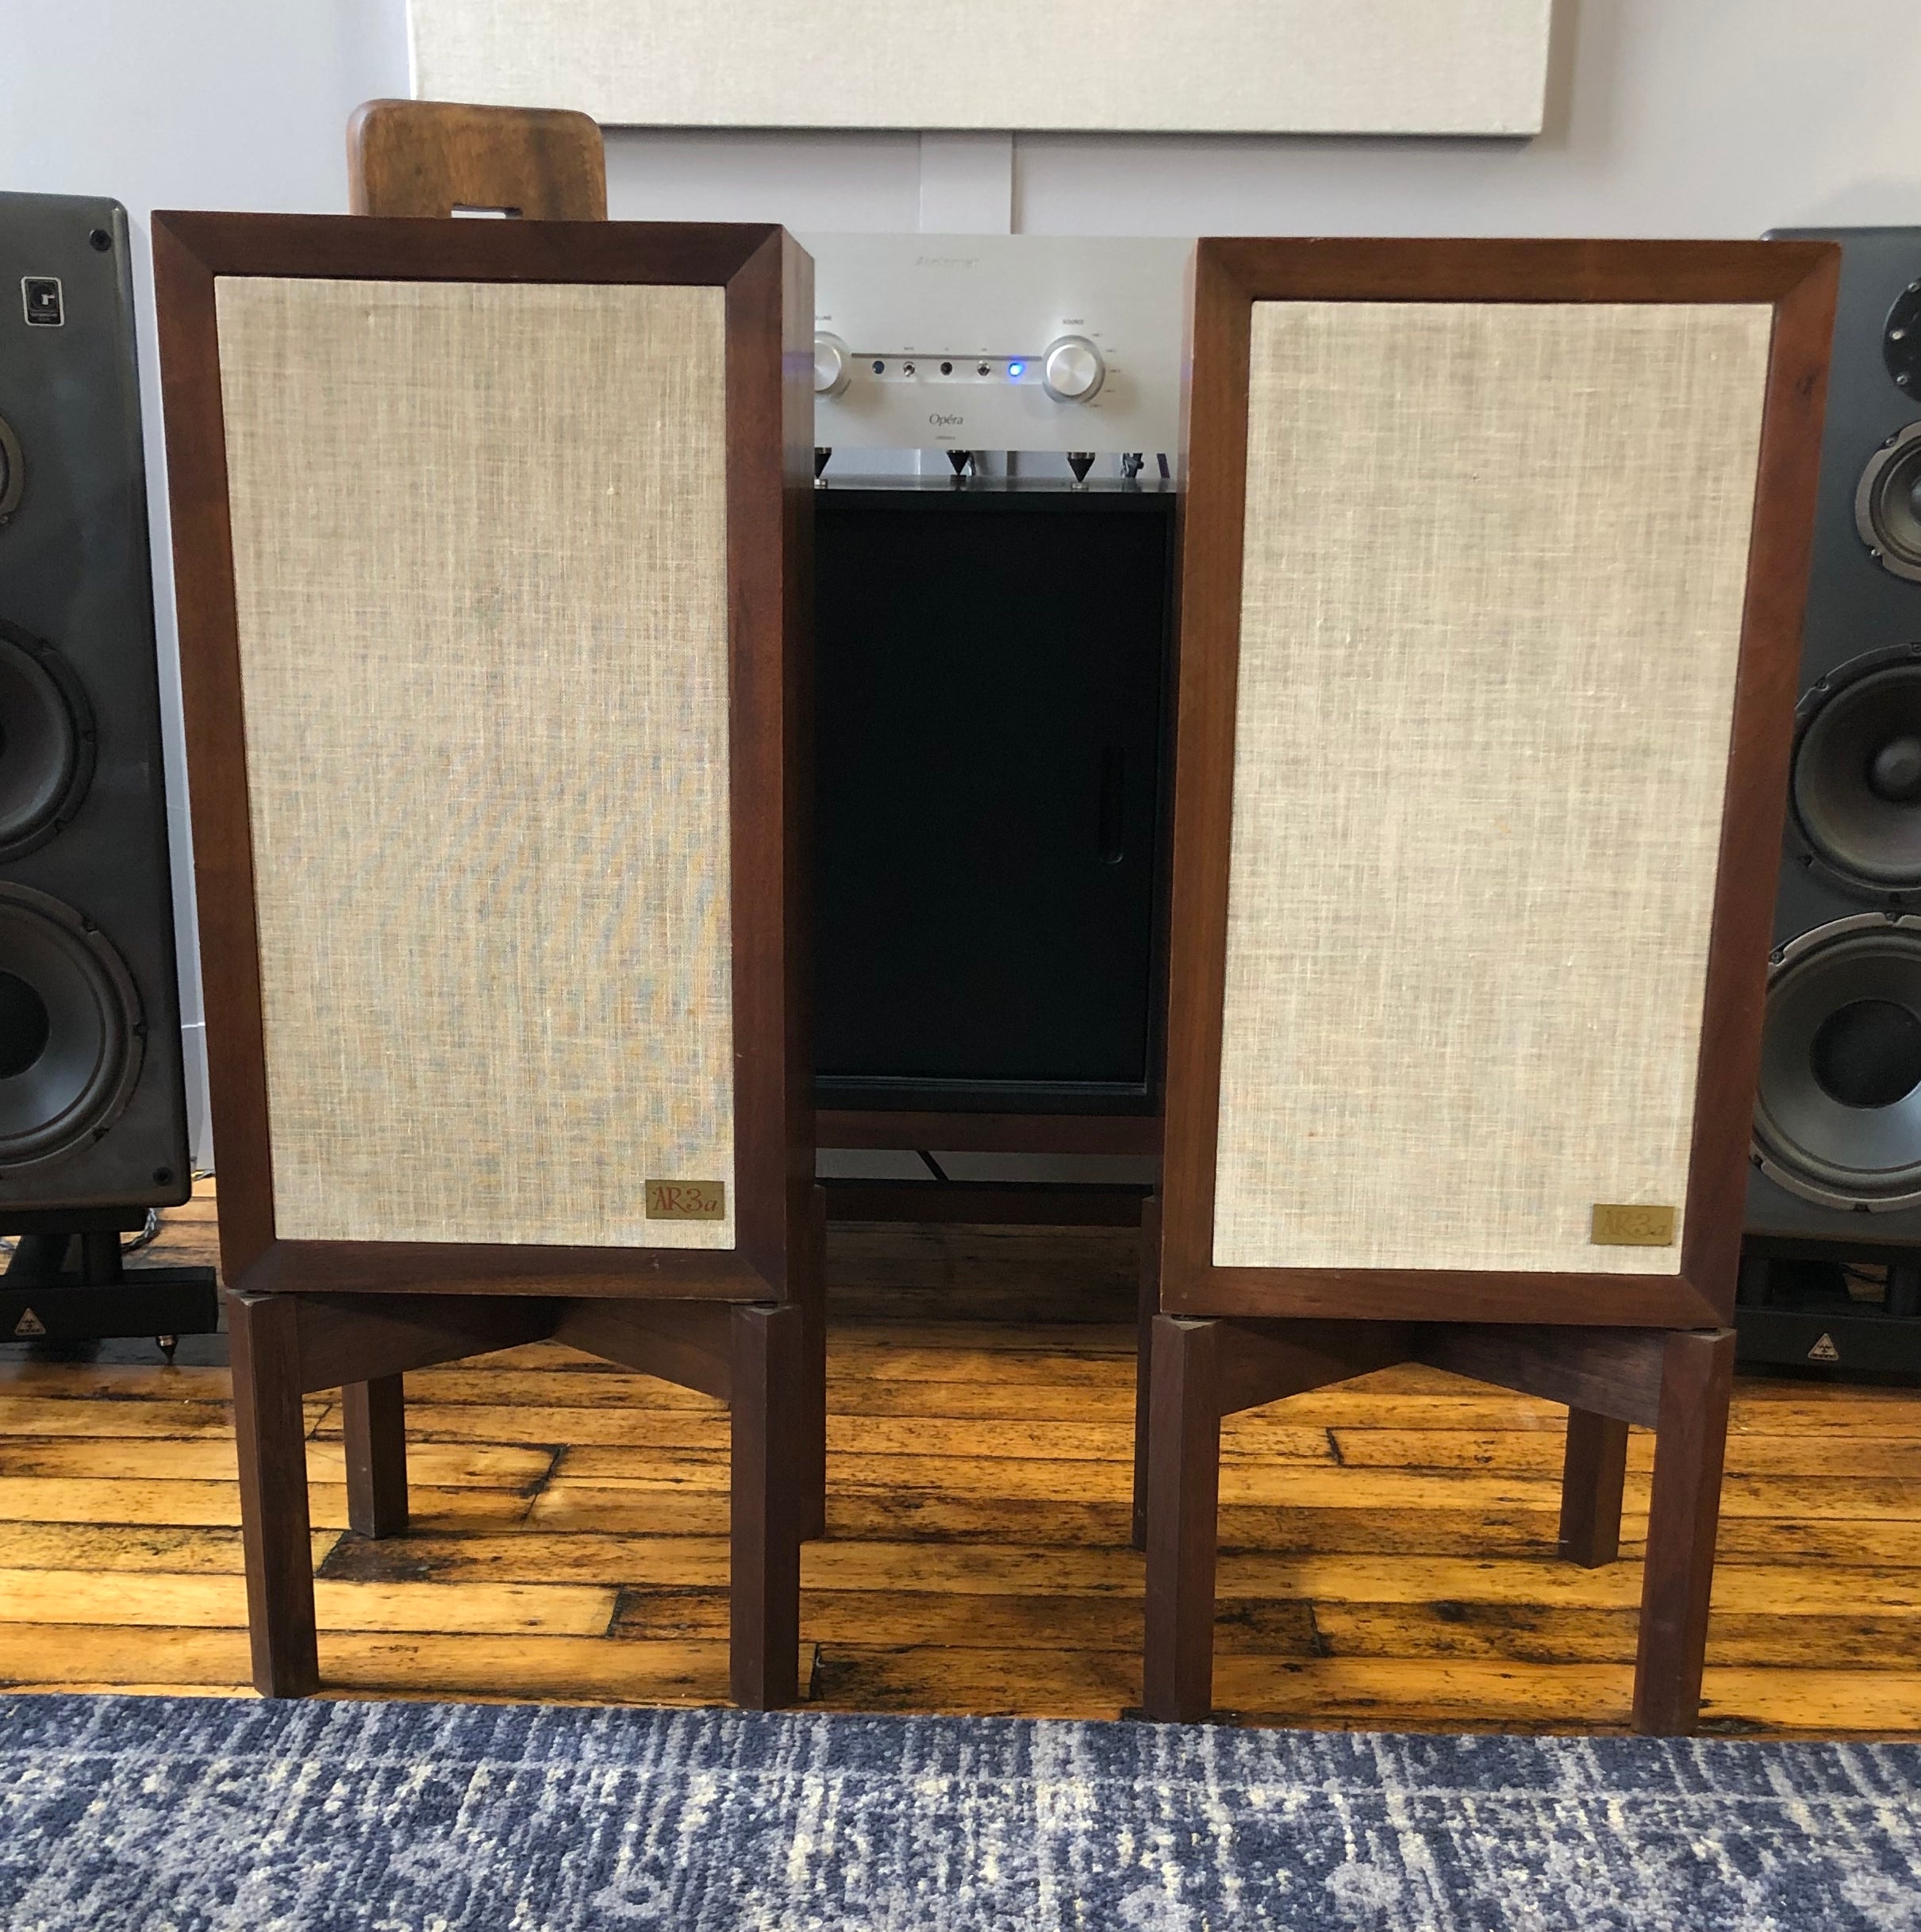 Acoustic Research AR3a Vintage Loudspeakers, Restored - SOLD